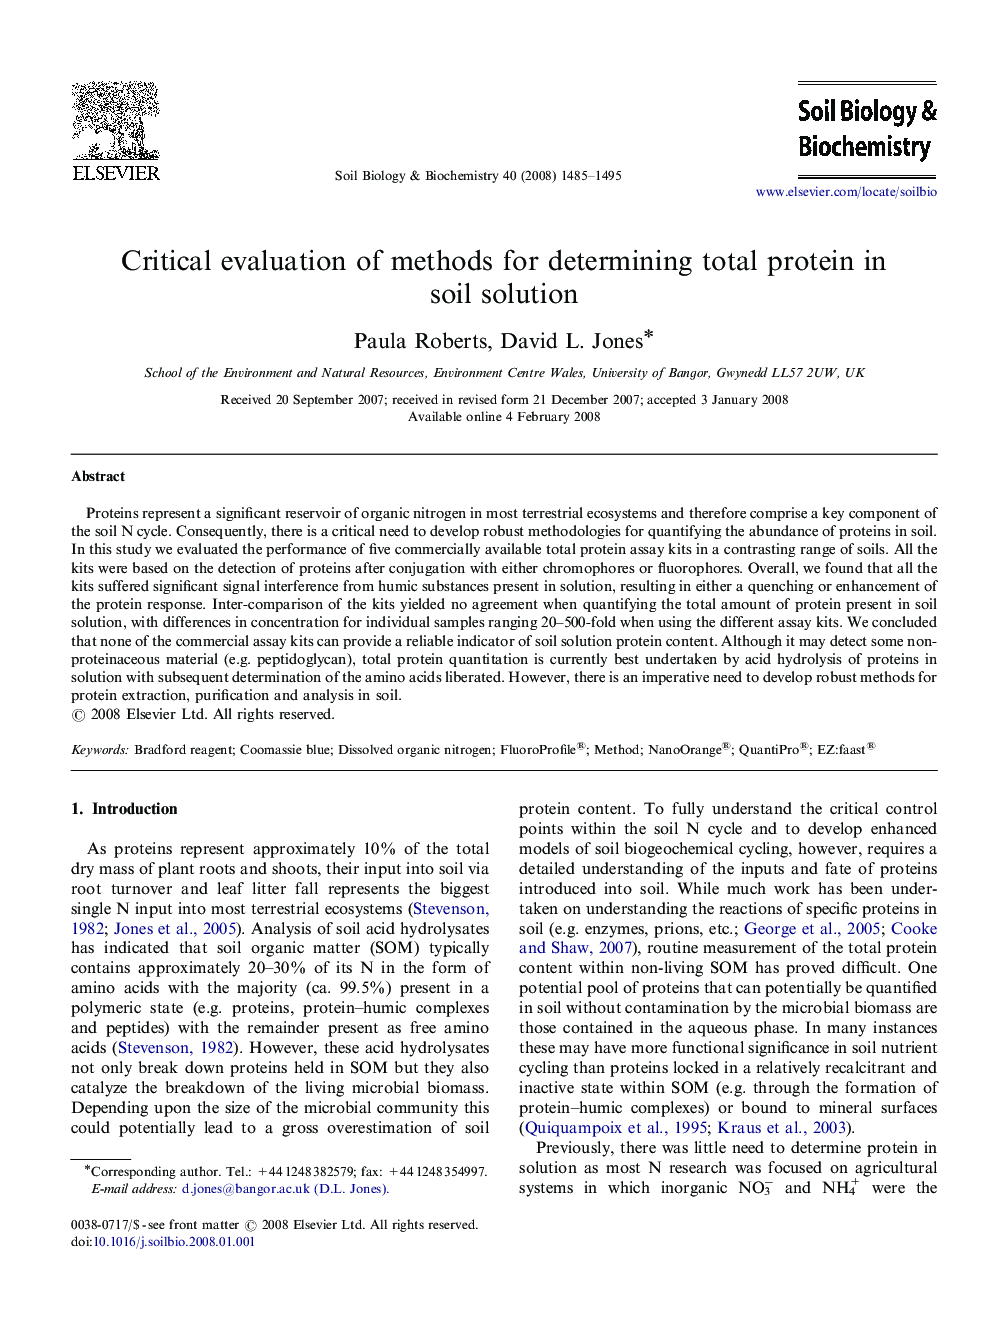 Critical evaluation of methods for determining total protein in soil solution